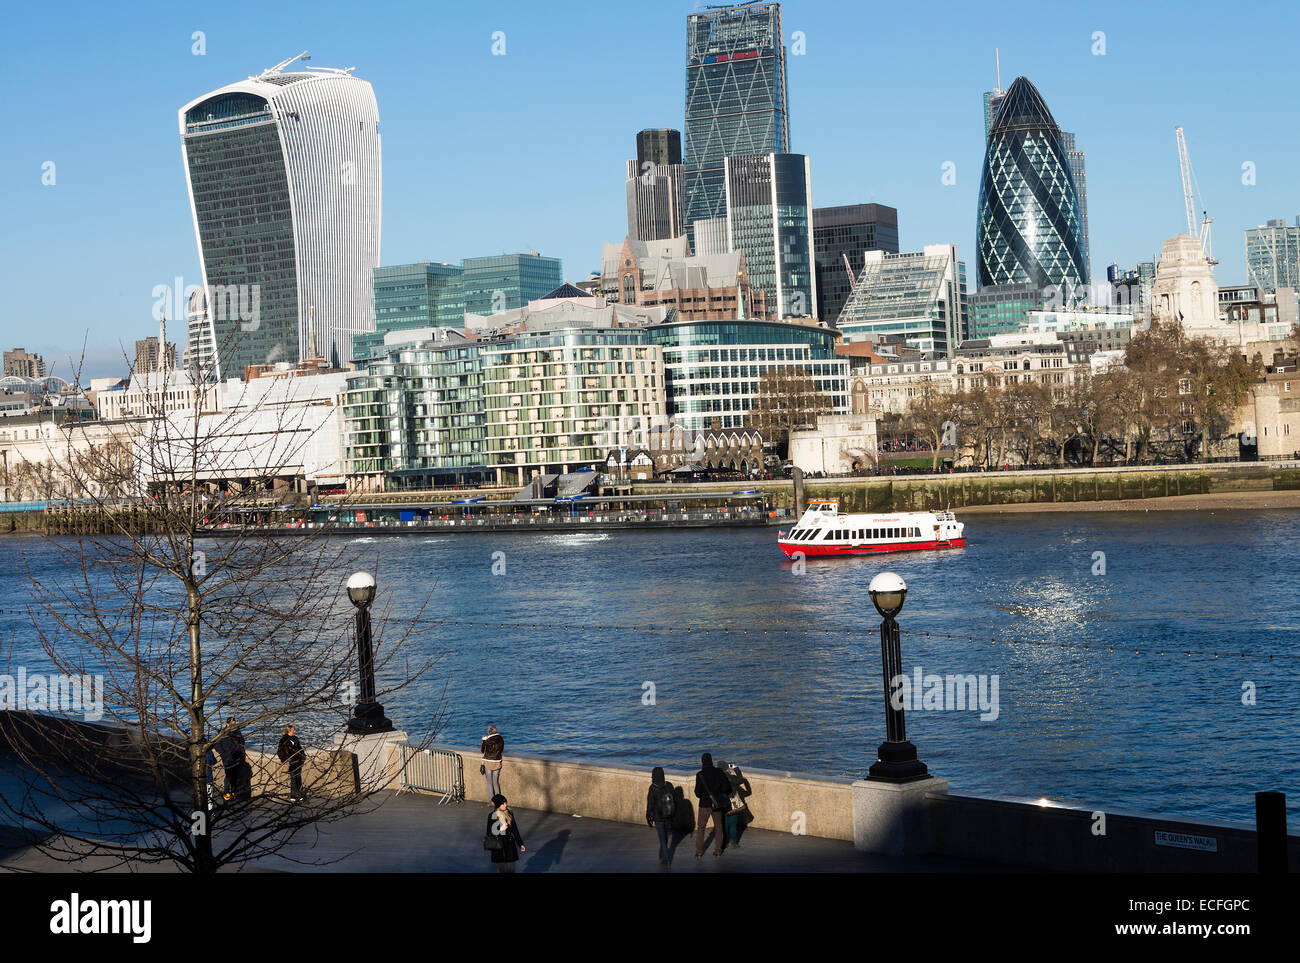 Modern Skyscrapers Make Up Part of the City of London Financial District by the River Thames England United Kingdom UK Stock Photo